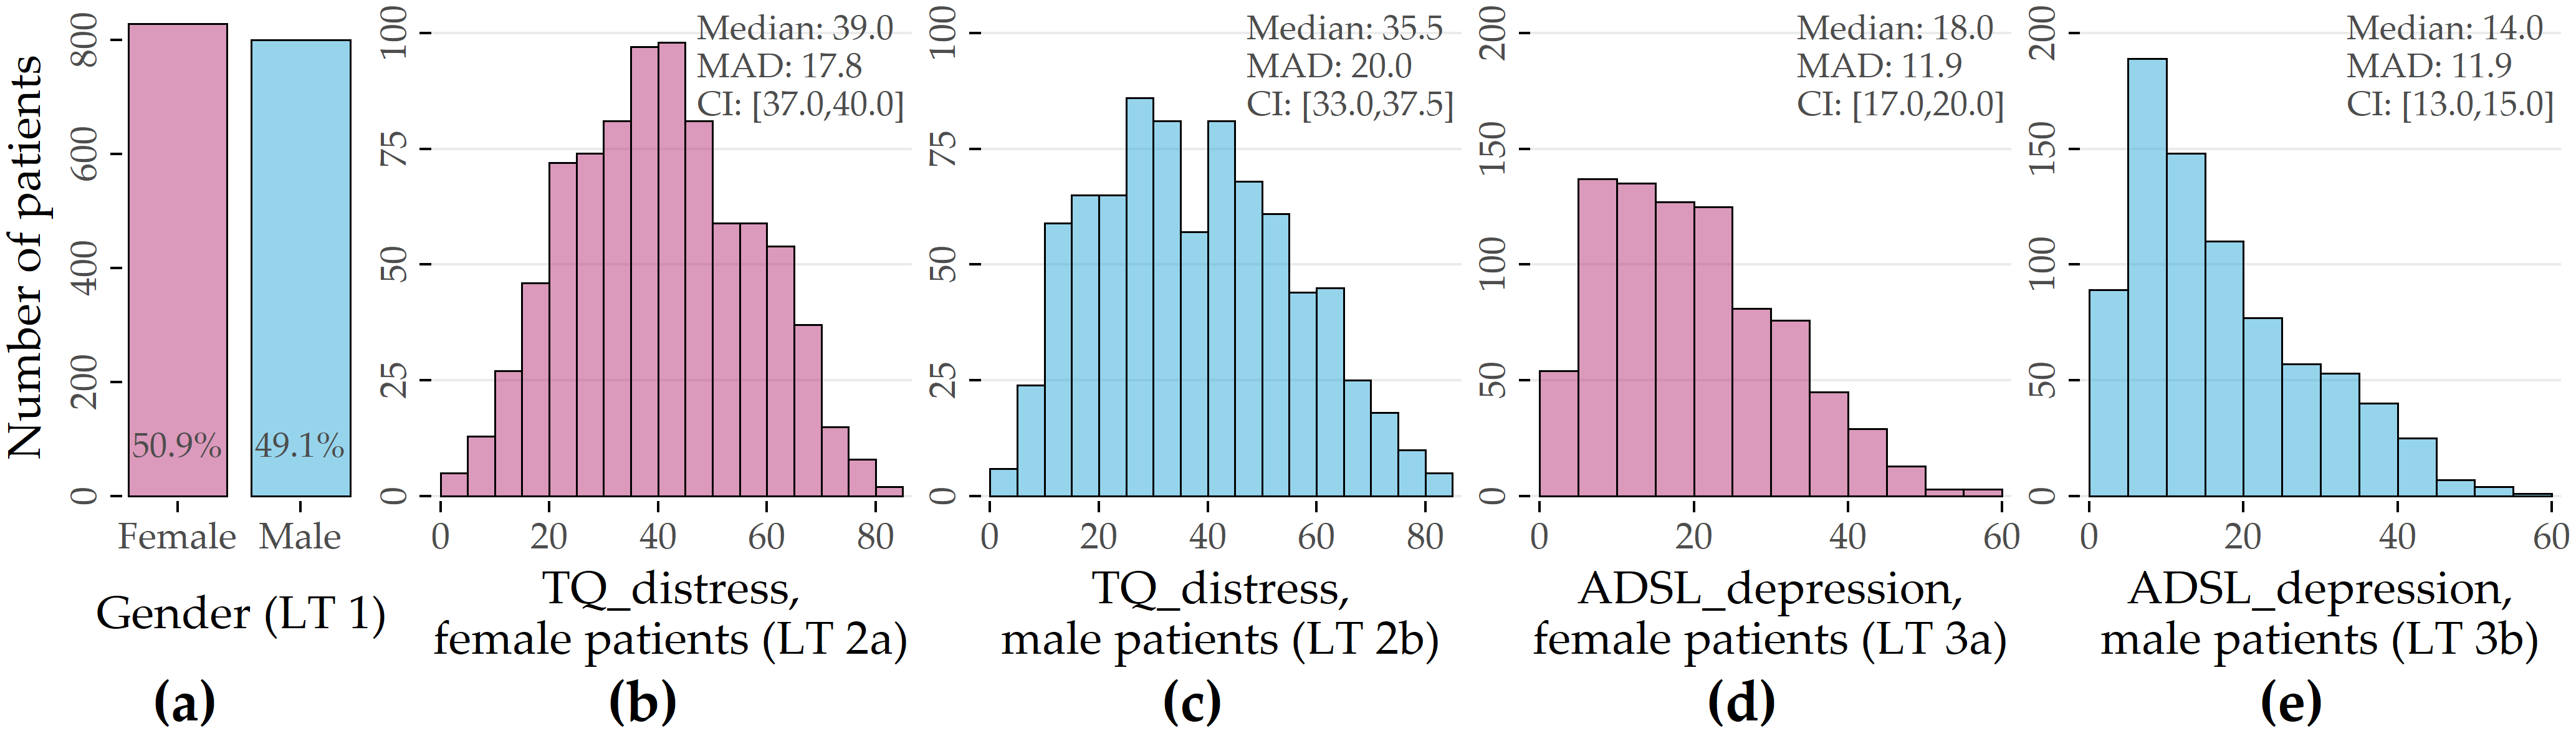 Distribution of target variables (LT 1-3). For the numerical targets, median, median absolute deviation (MAD), and non-parametric 95% confidence interval (CI) using bootstrap sampling [295] with 2000 samples are presented.